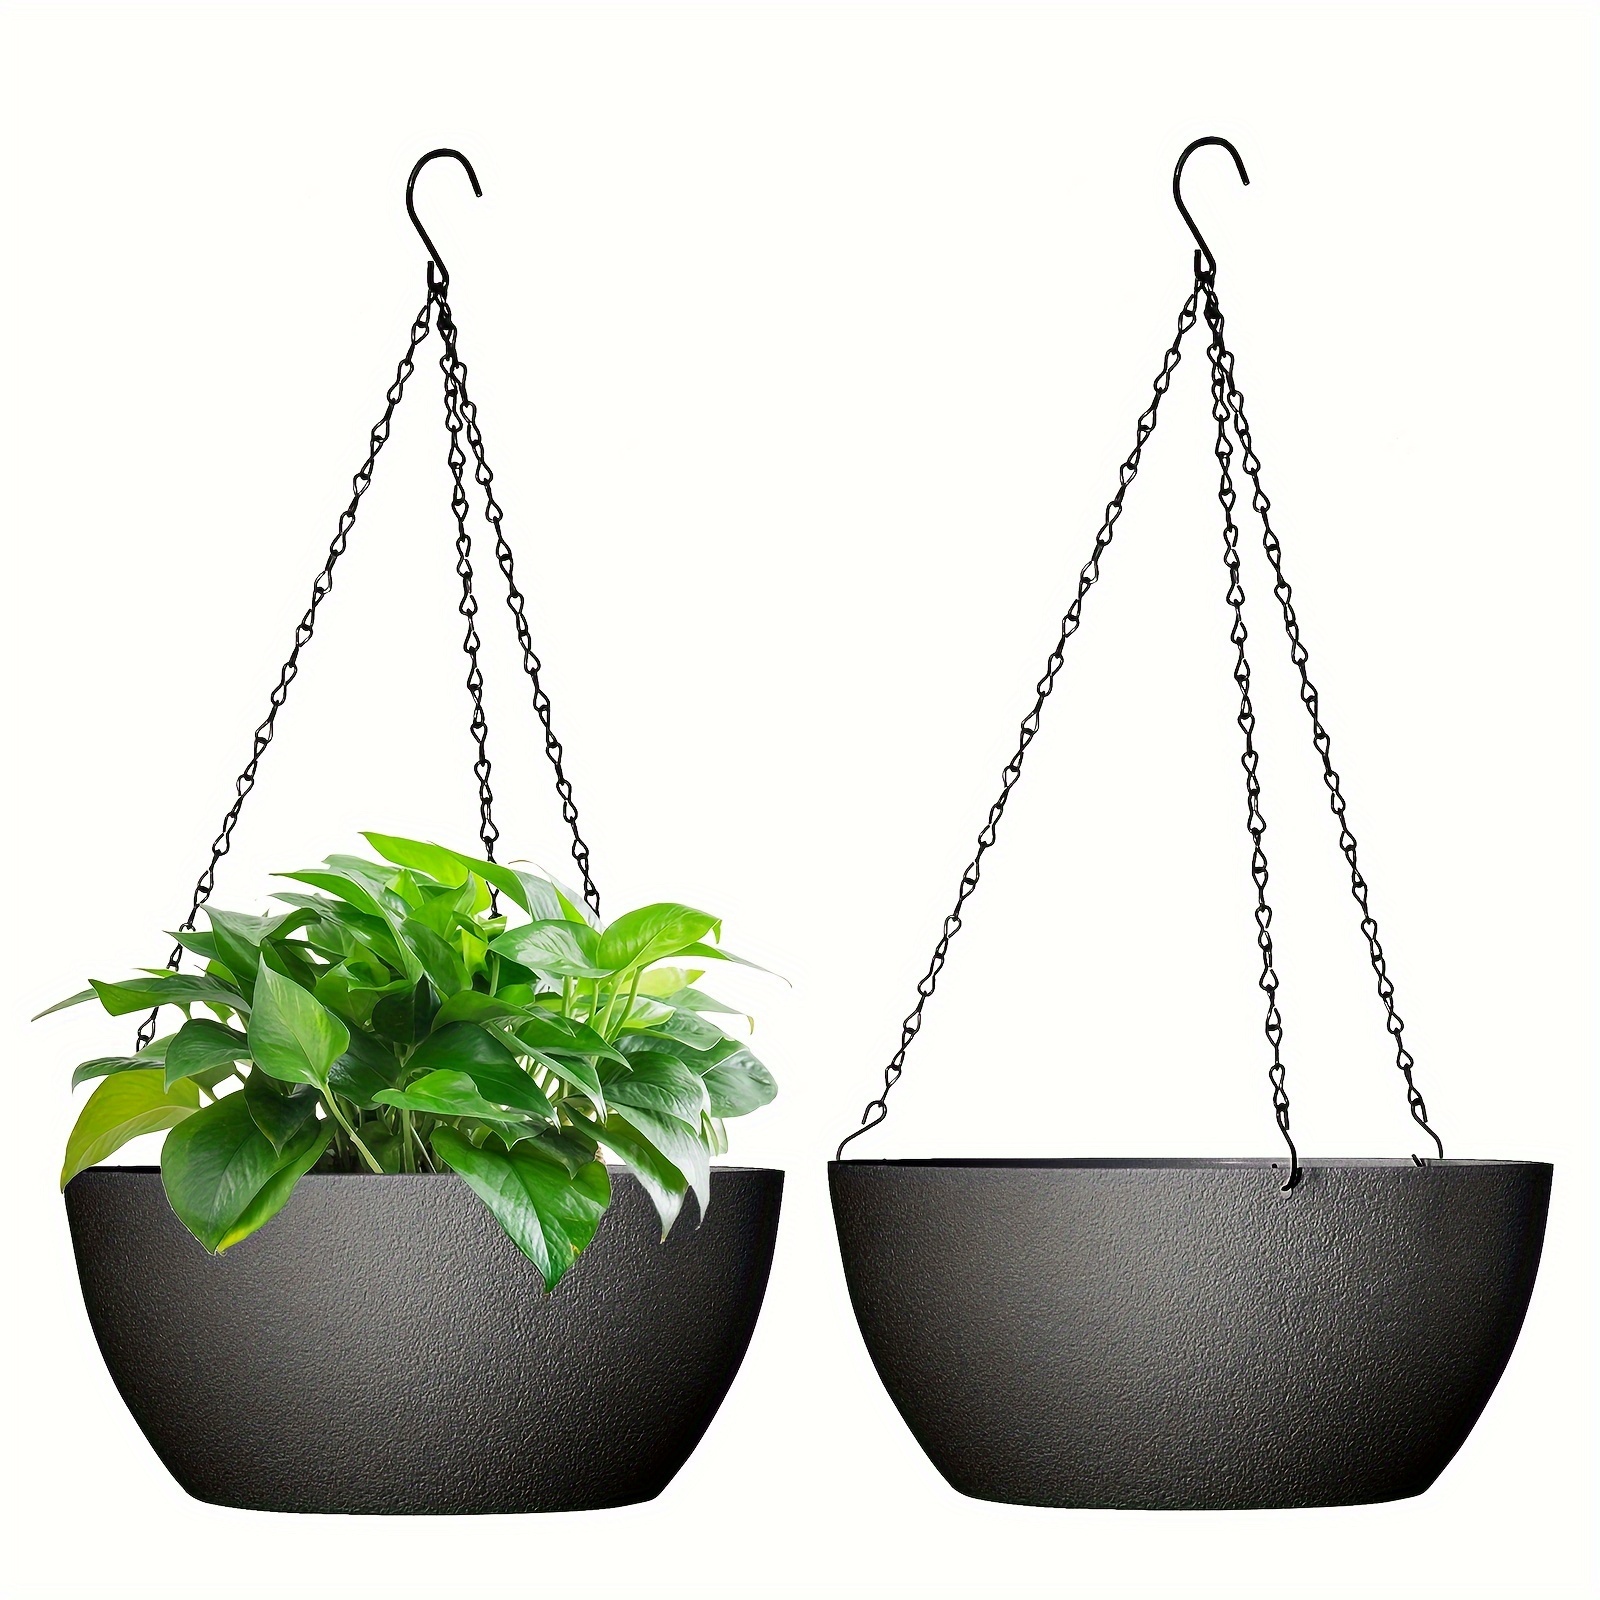 

2pcs, Ten-inch Hanging Pots Flower Pot Indoor Modern Decorative Pots For Plants With Drainage Hole And Tray For All House Plants, Succulents, Flowers, And Cactus